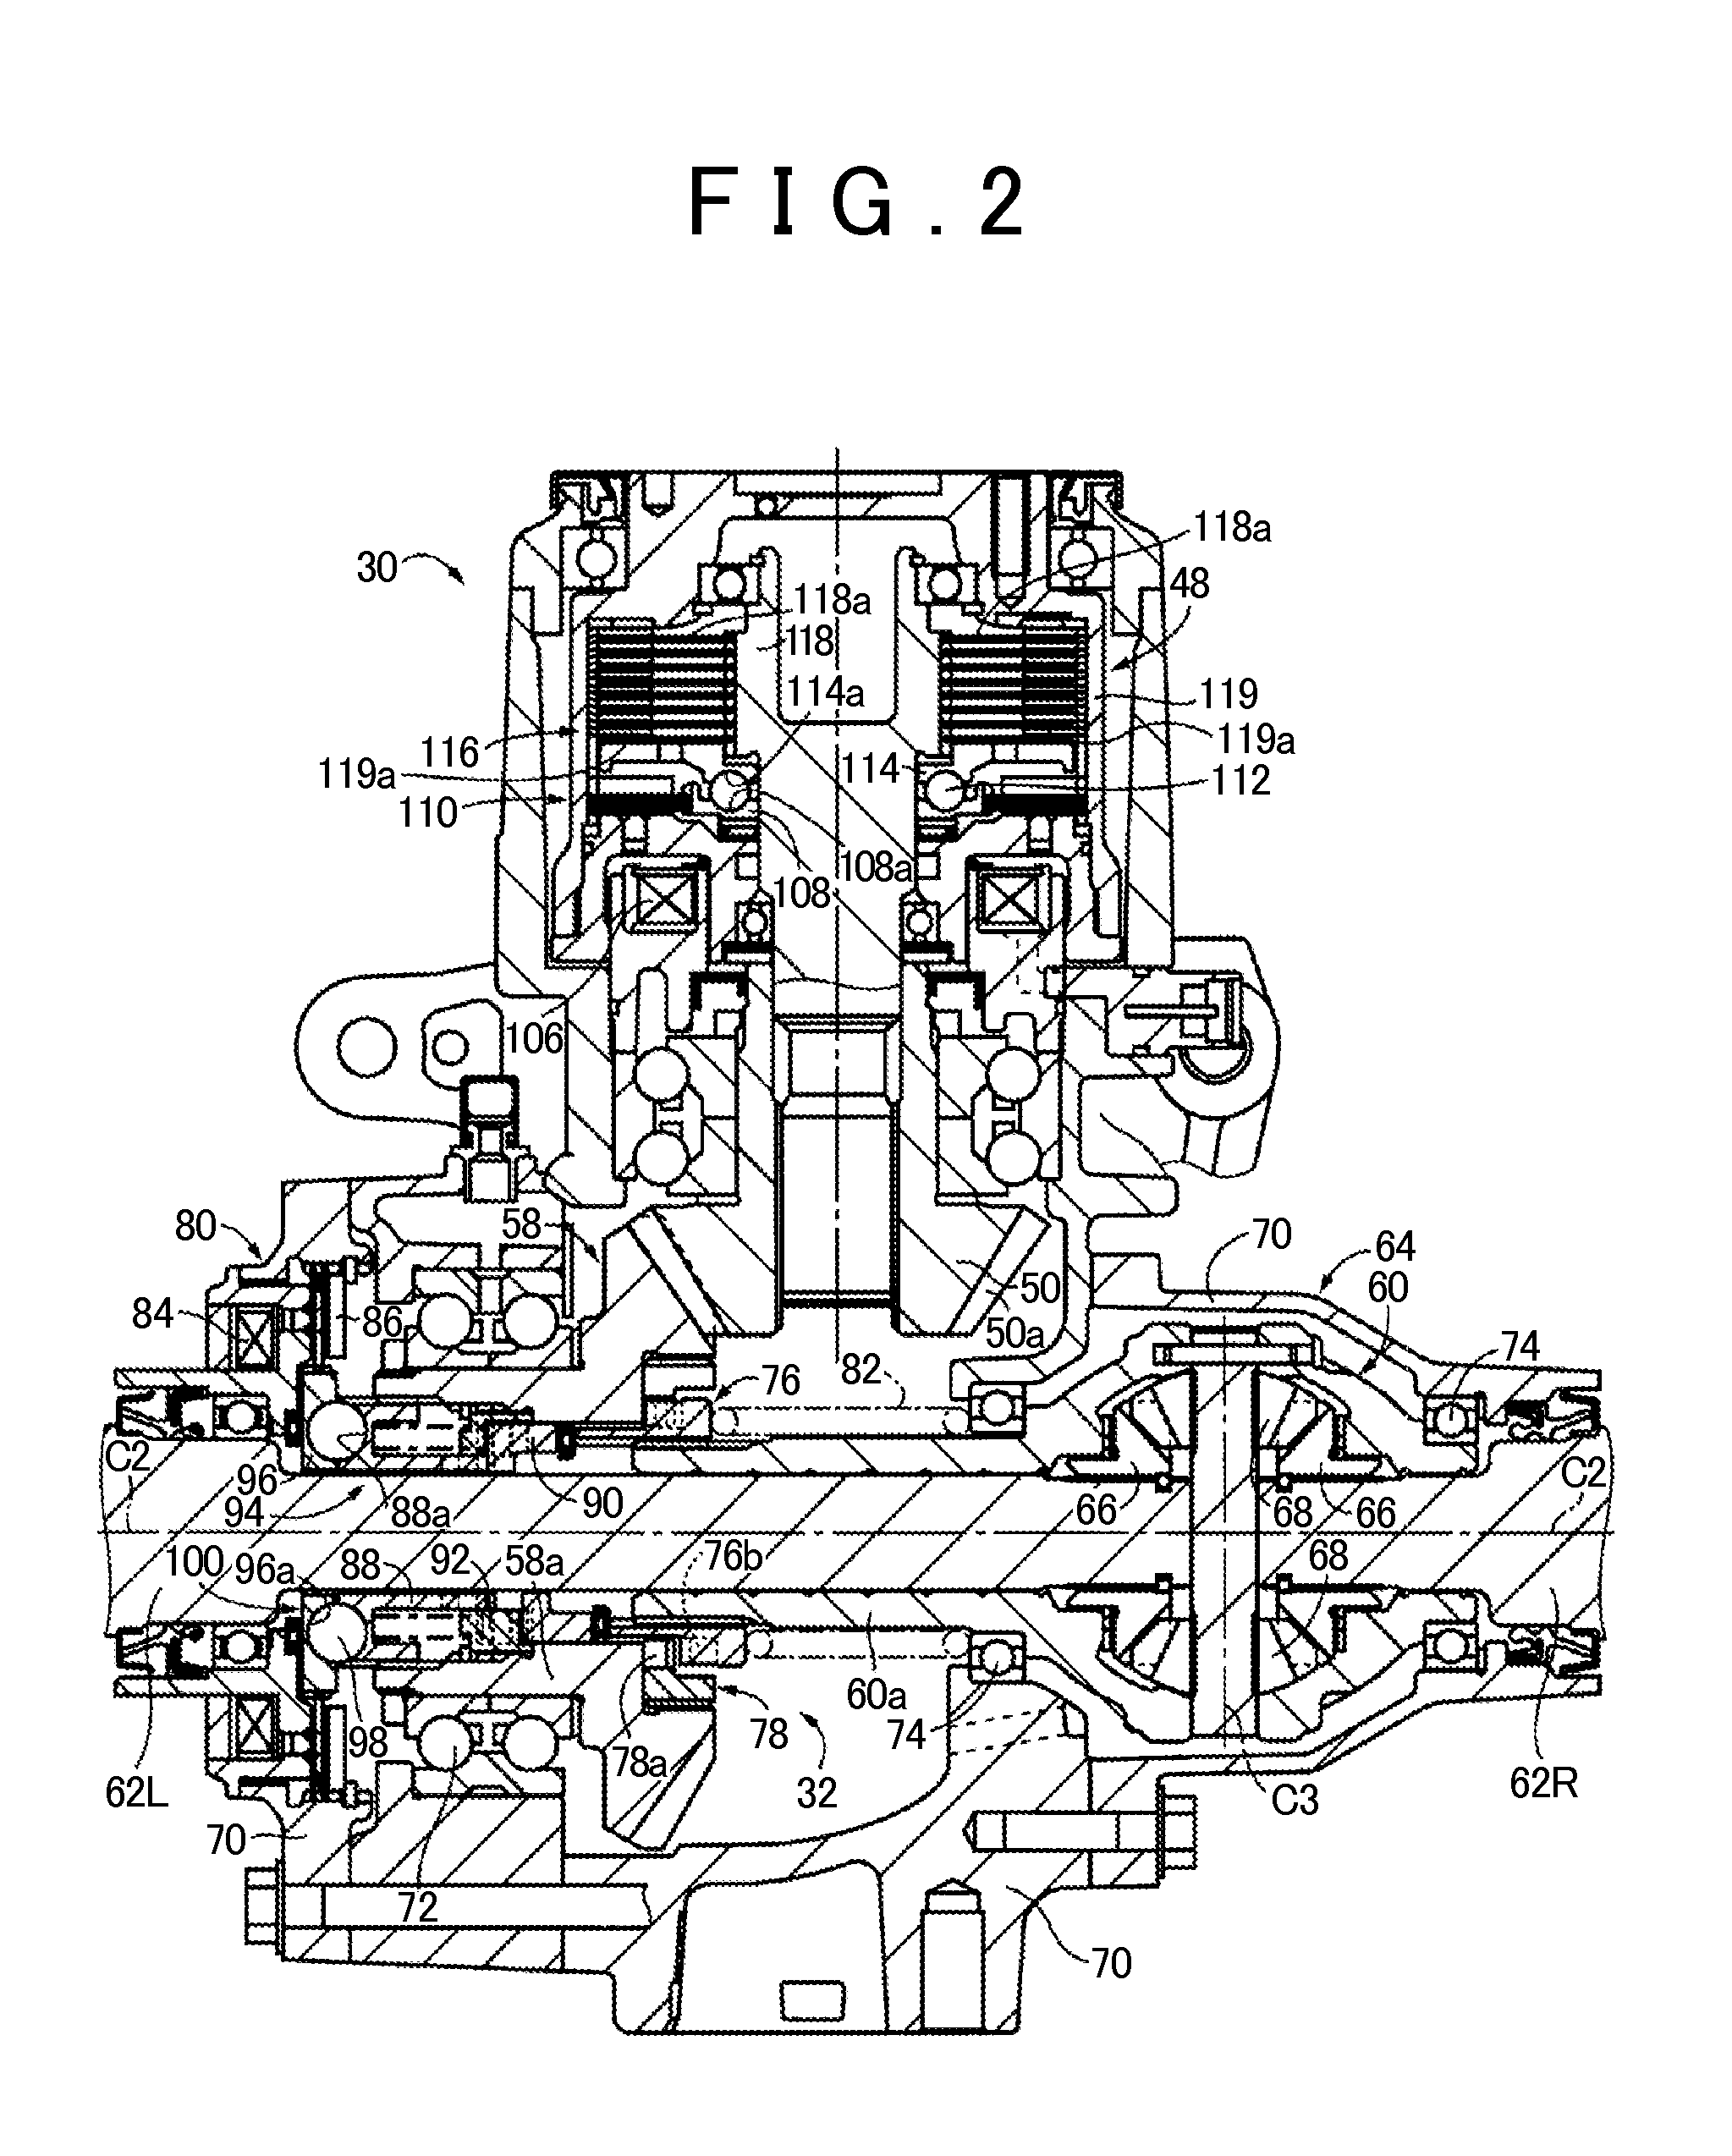 Auxiliary drive wheel-side differential unit for four-wheel drive vehicle